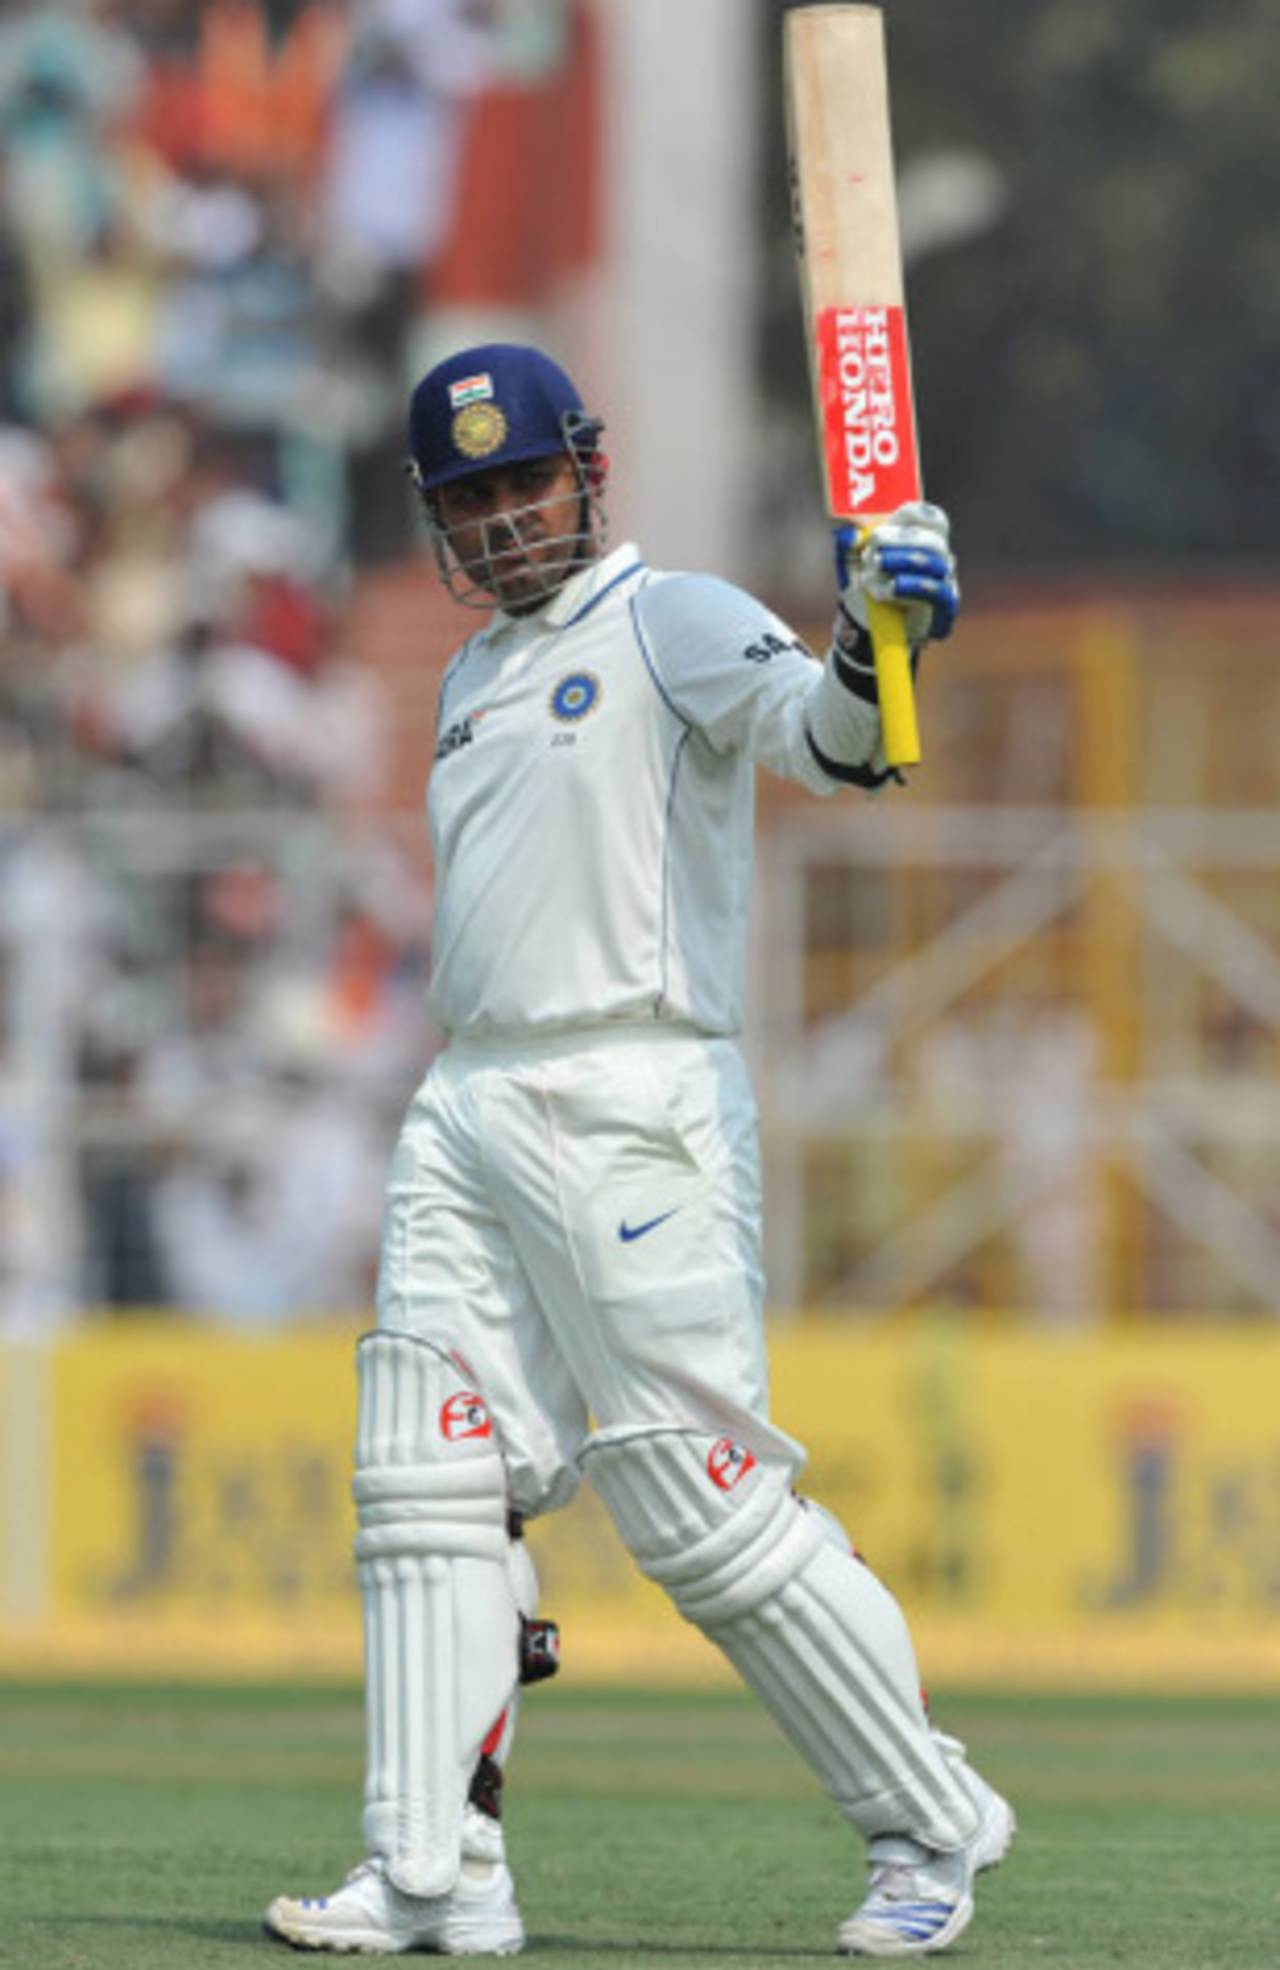 If Virender Sehwag gets to raise his bat to the crowd on the first day of the Test, chances are India will have the upper hand&nbsp;&nbsp;&bull;&nbsp;&nbsp;Getty Images